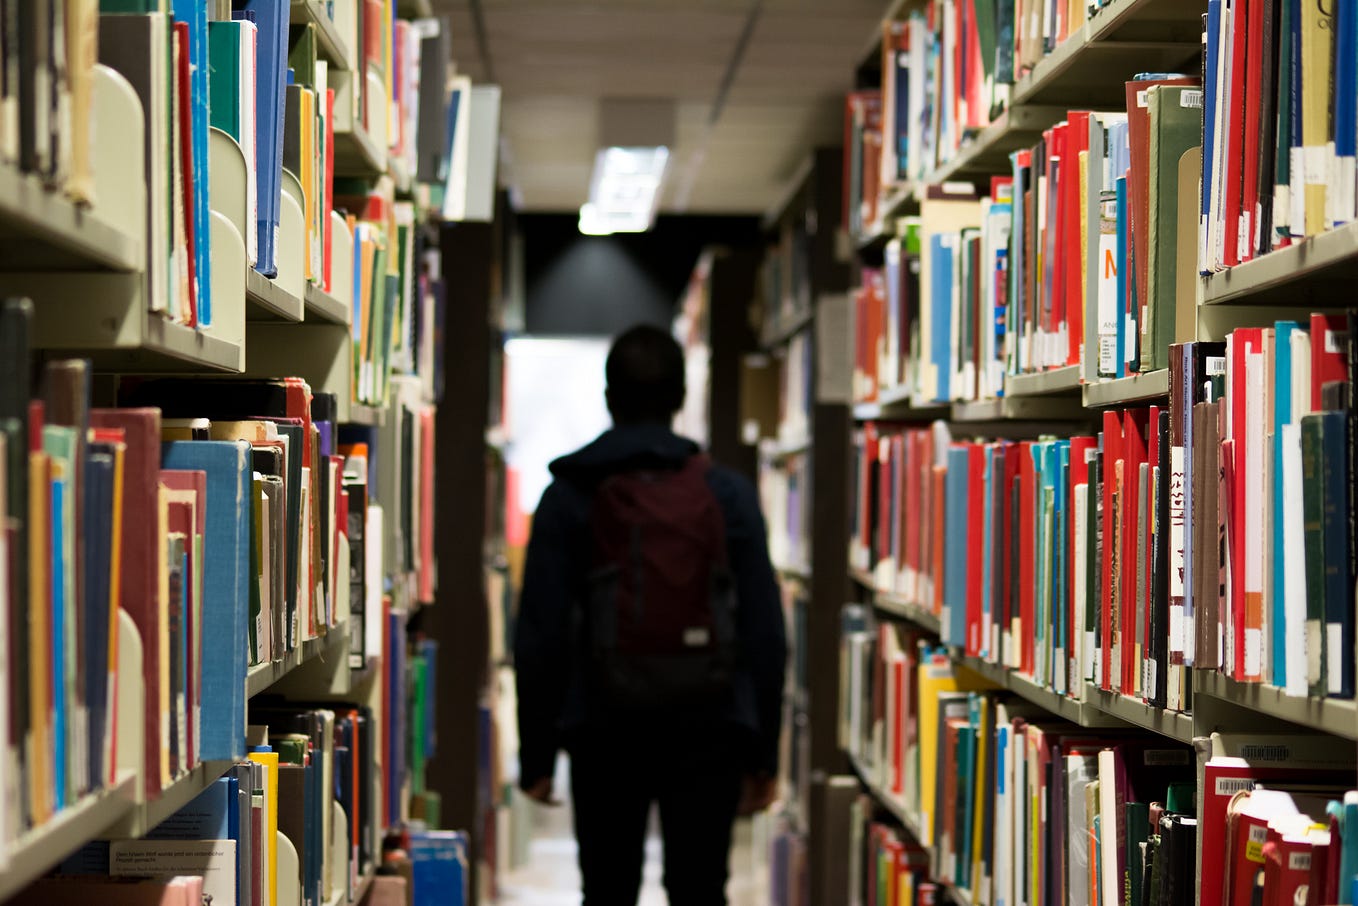 A silhouette of a man standing in the library aisle.